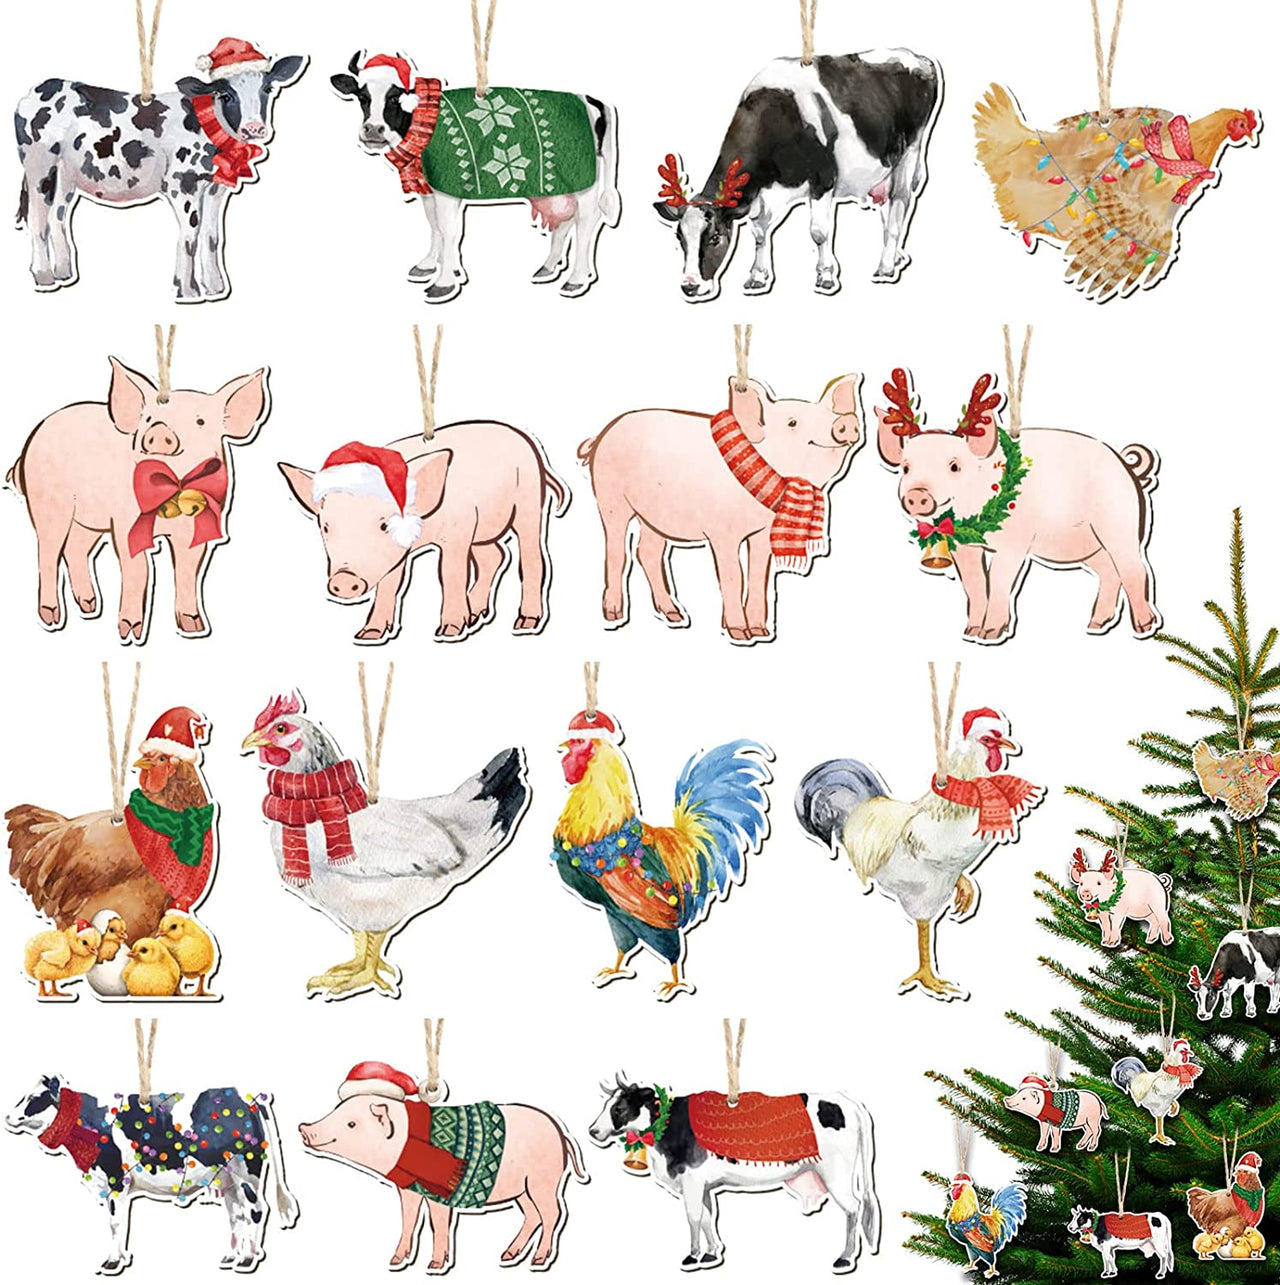 15 Pcs Christmas Ornaments Farm Animal Christmas Ornaments Wooden Farmhouse Theme Pig Cow Rooster Chicken Christmas Hanging Decorations for Christmas Tree Fireplace Home, 15 Styles